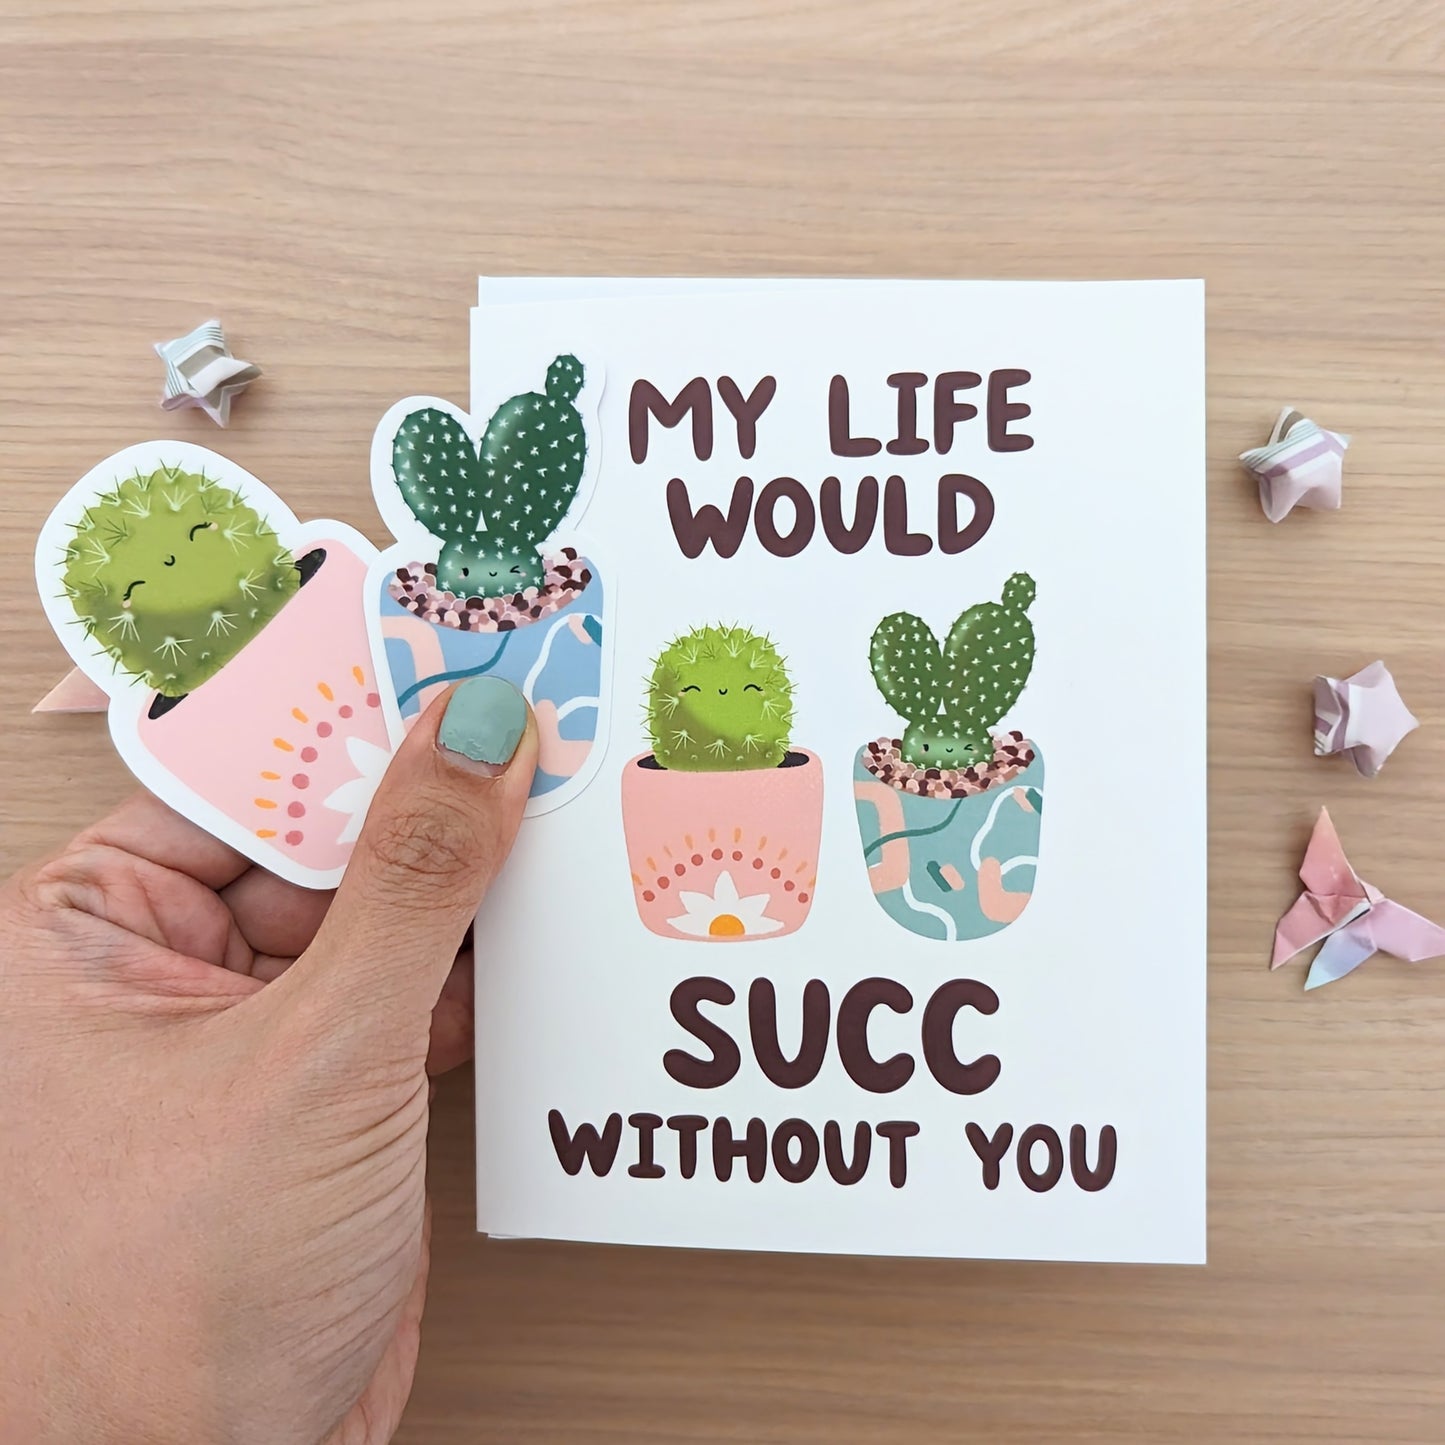 My Life Would Succ Without You Blank Greeting Card